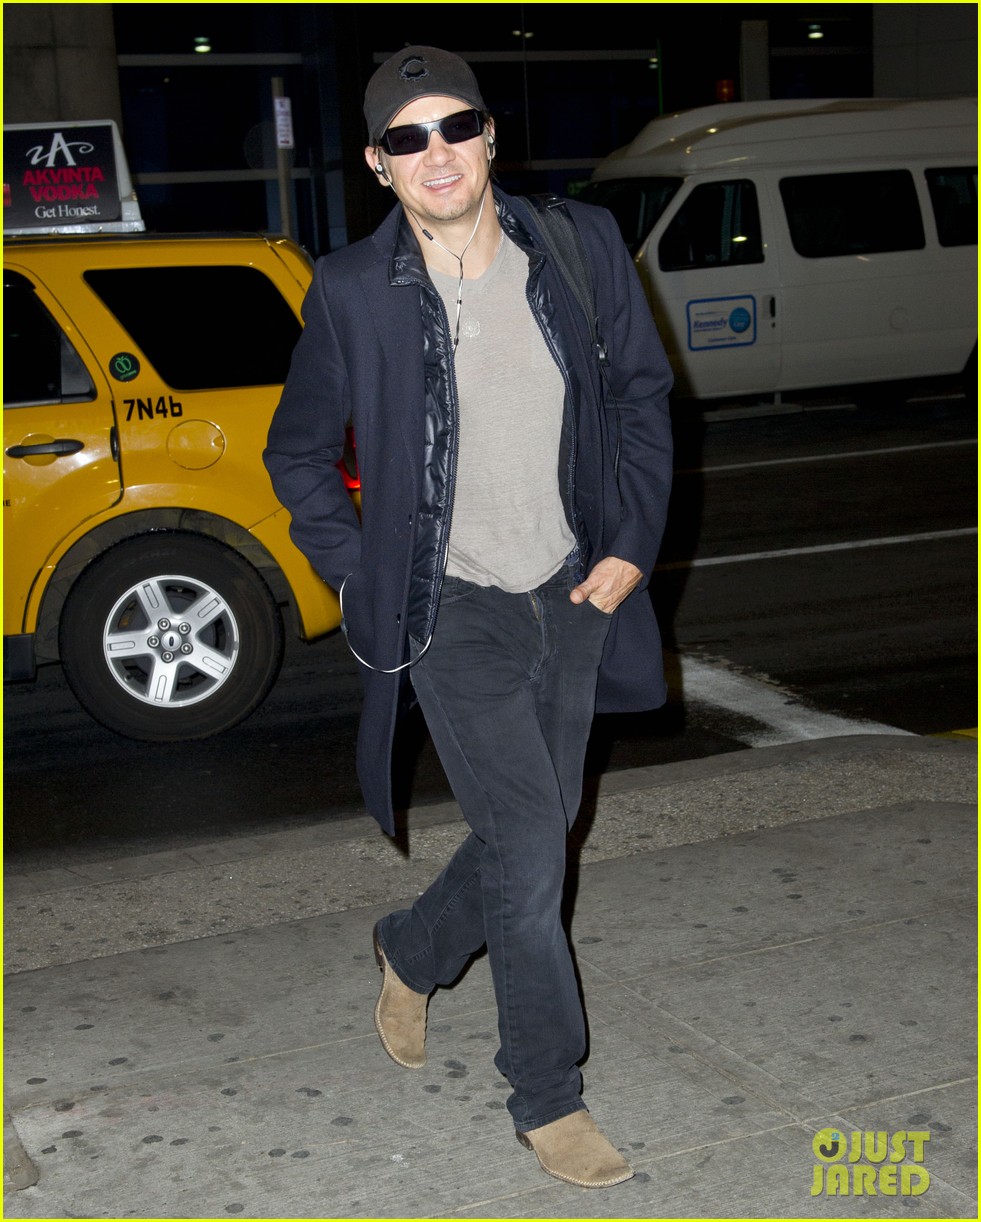 Candids 9 Jeremy Renner Daily ジェレミー レナー通信